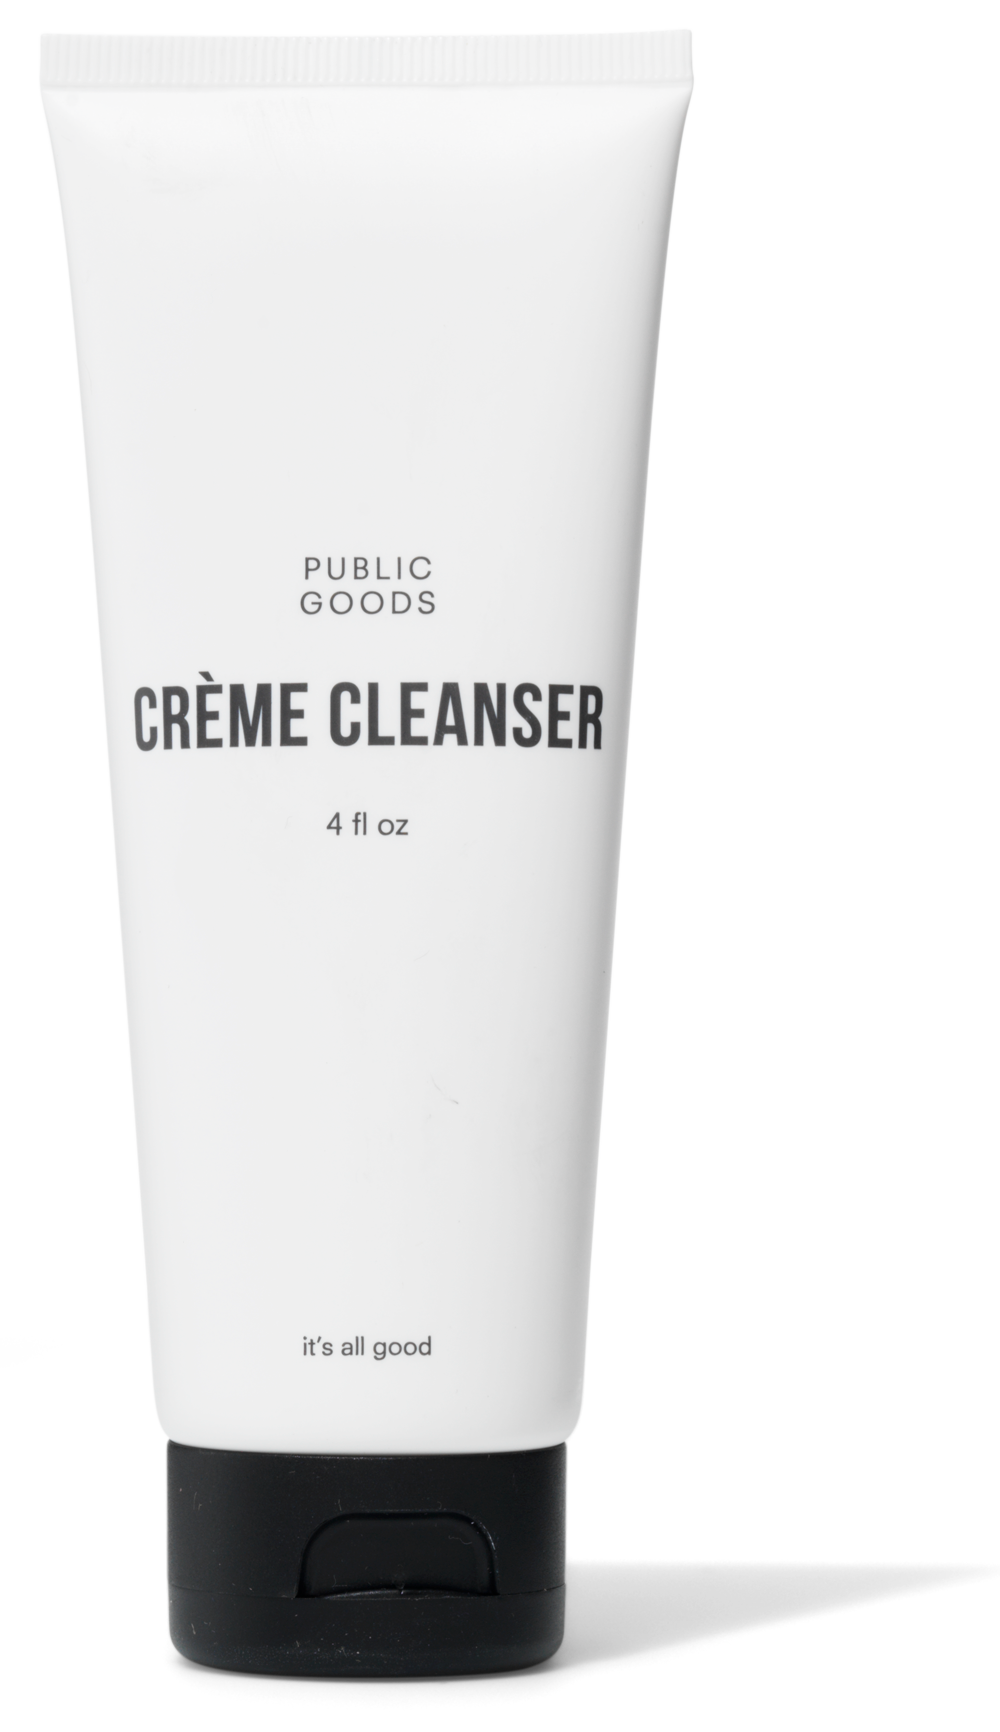 Creme Cleanser product image